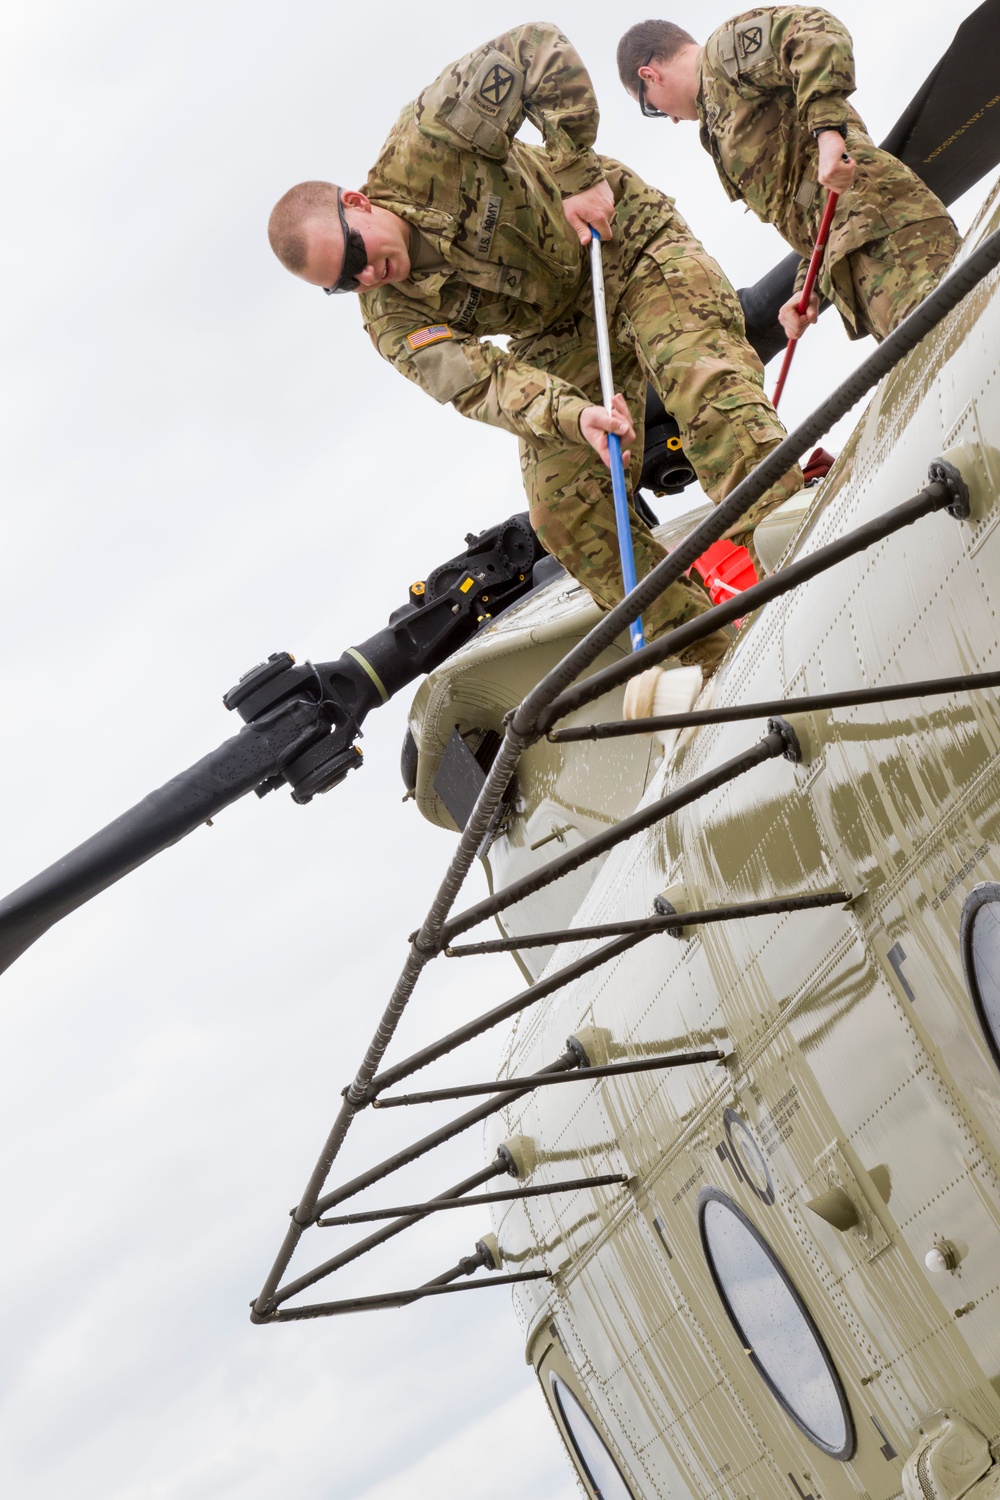 Soldiers ensure aircraft in the Baltics are corrosion free through regular checks and washes